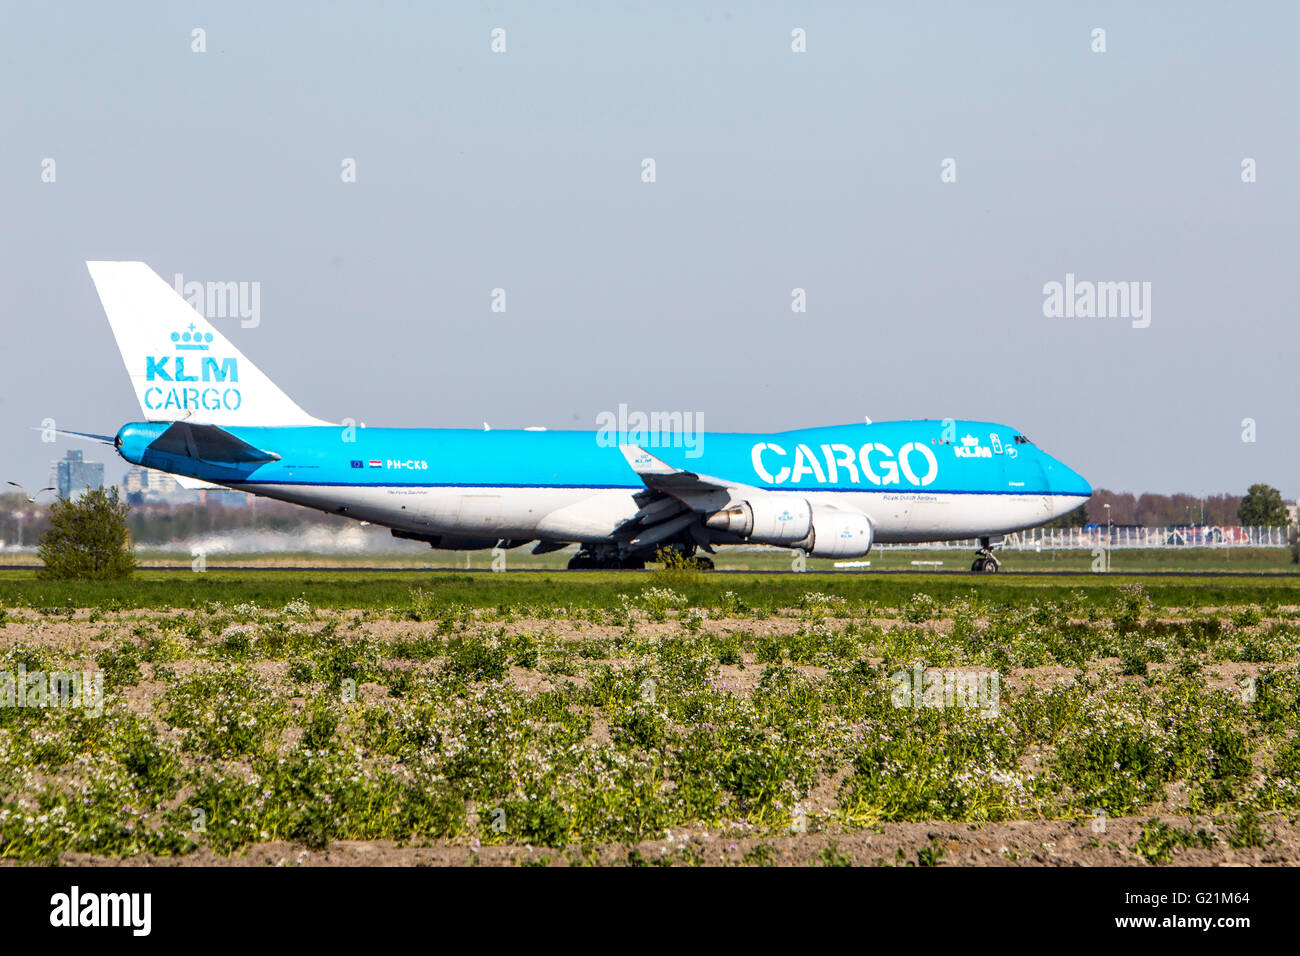 Air planes on taxiway at Amsterdam Schiphol, international airport, KLM tcargo jumbo jet, Boeing 747, Stock Photo